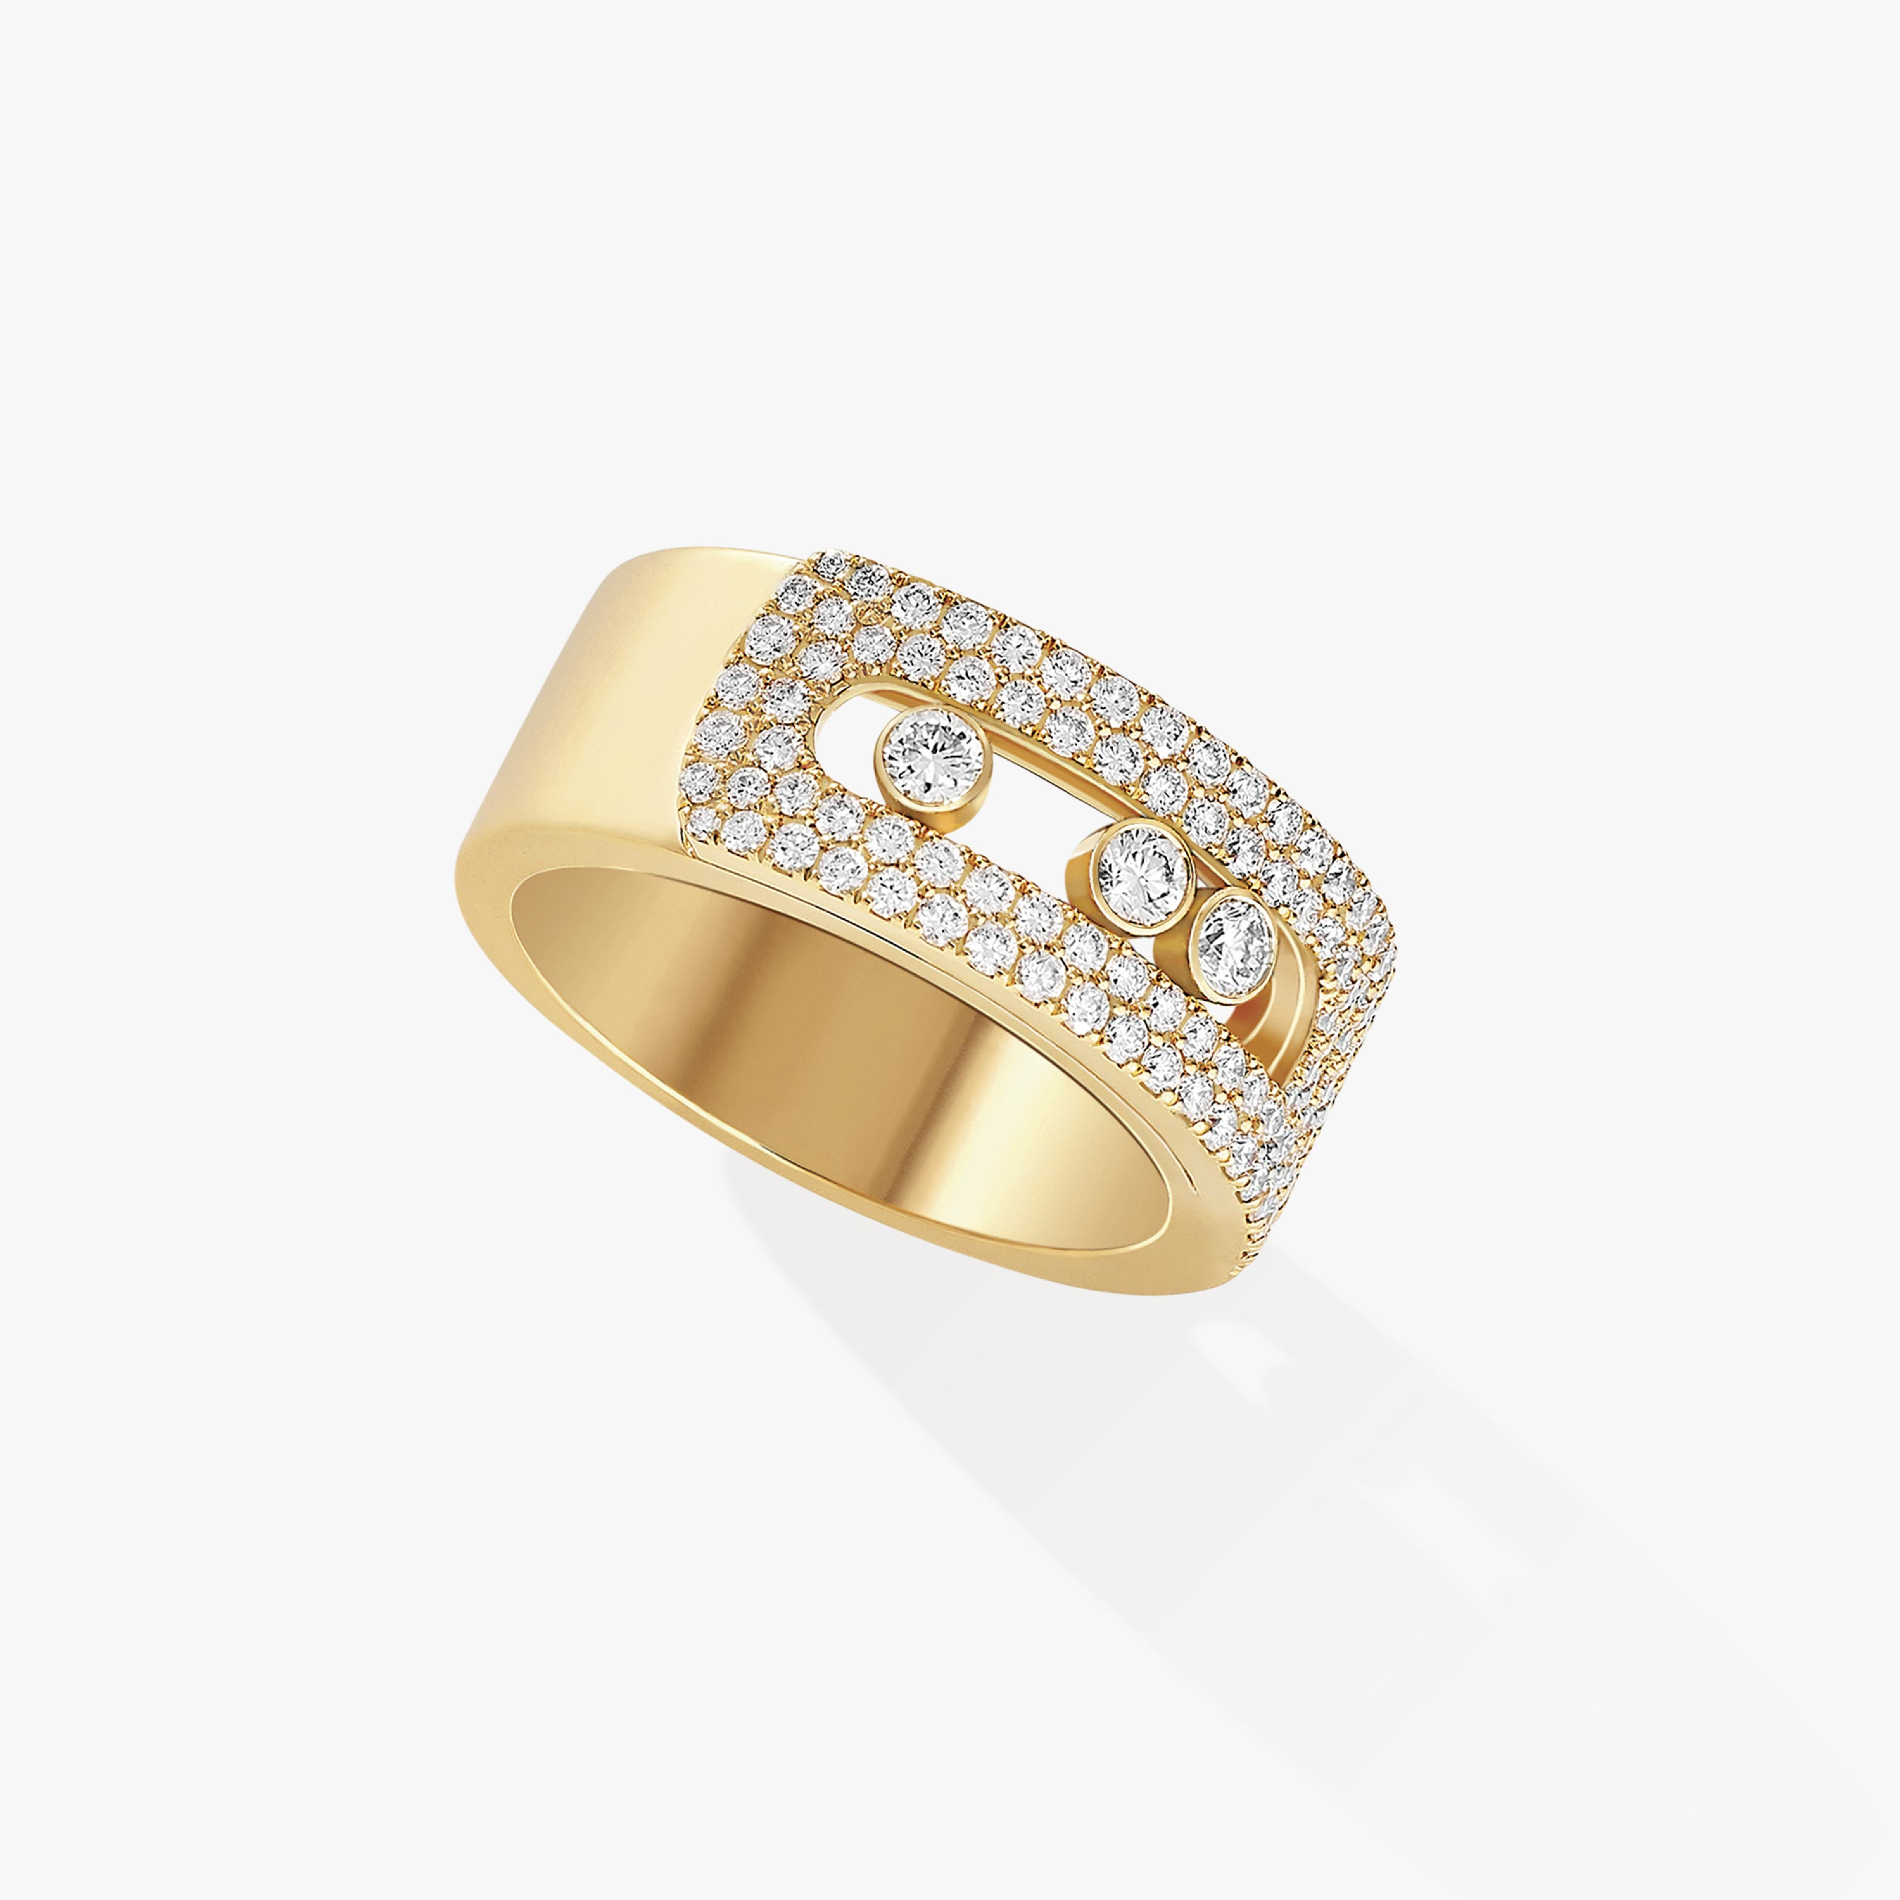 Move Noa LM Pavé Yellow Gold For Her Diamond Ring 10102-YG